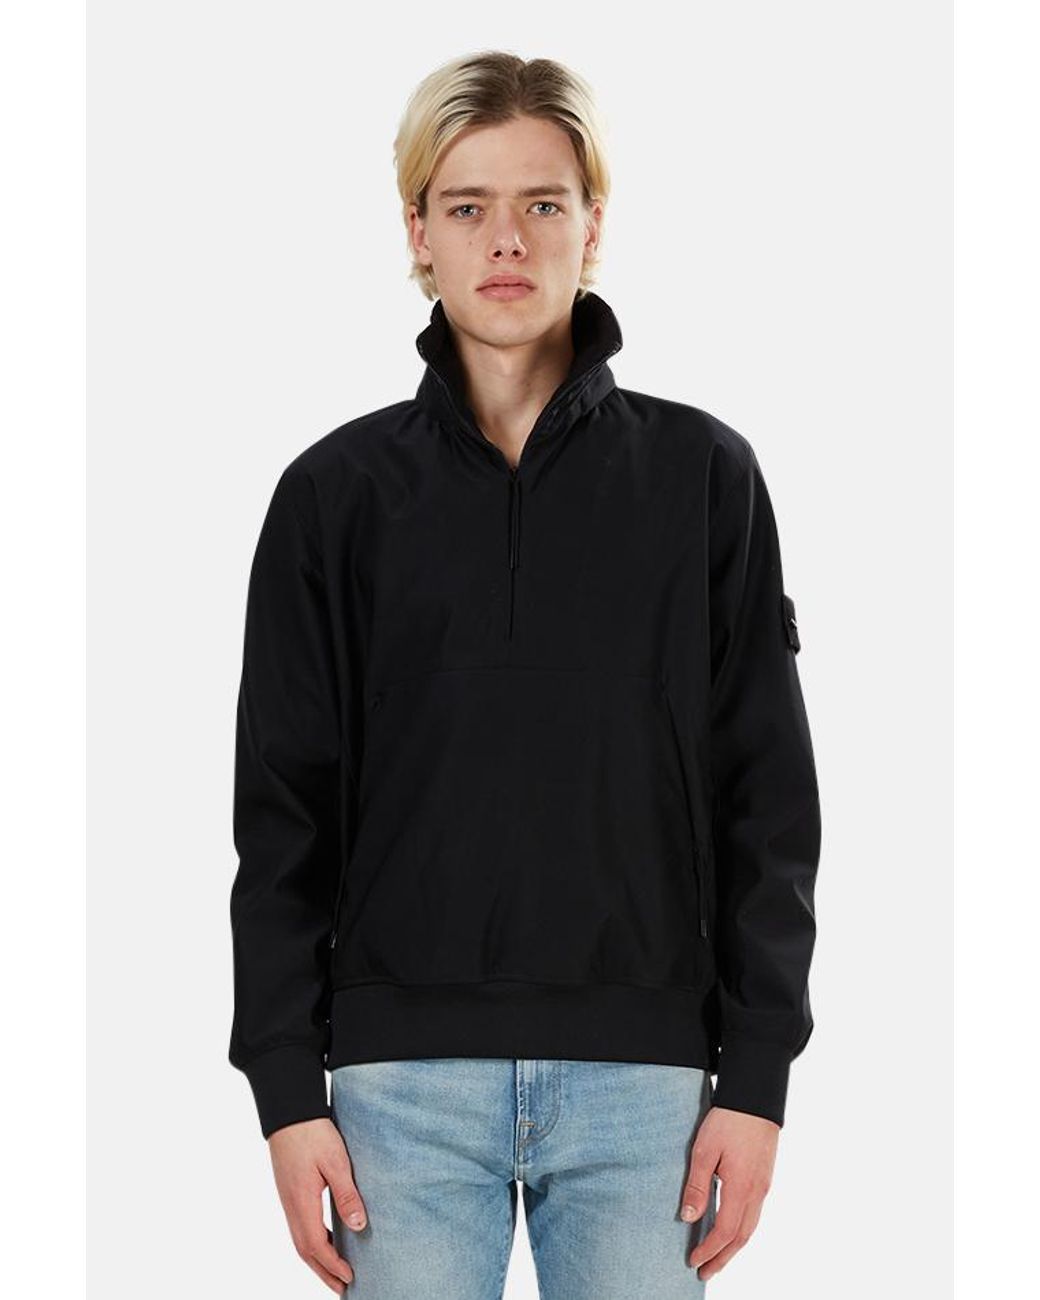 Stone Island Synthetic Ghost Nylon 3/4 Zip Pullover Jacket in Black for Men  - Lyst